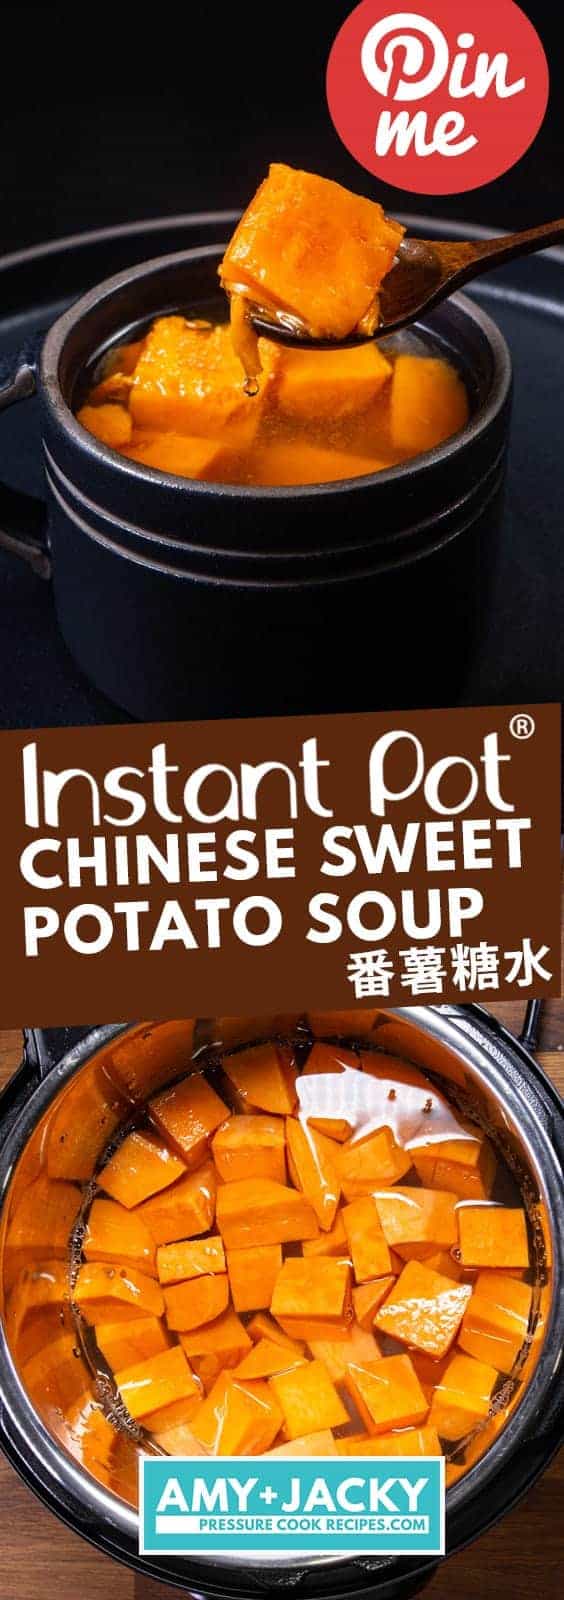 Instant Pot Chinese Sweet Potato Soup | 壓力鍋番薯糖水 | Pressure Cooker Chinese Sweet Potato Soup | 番薯姜糖水 | Sweet Potato Soup